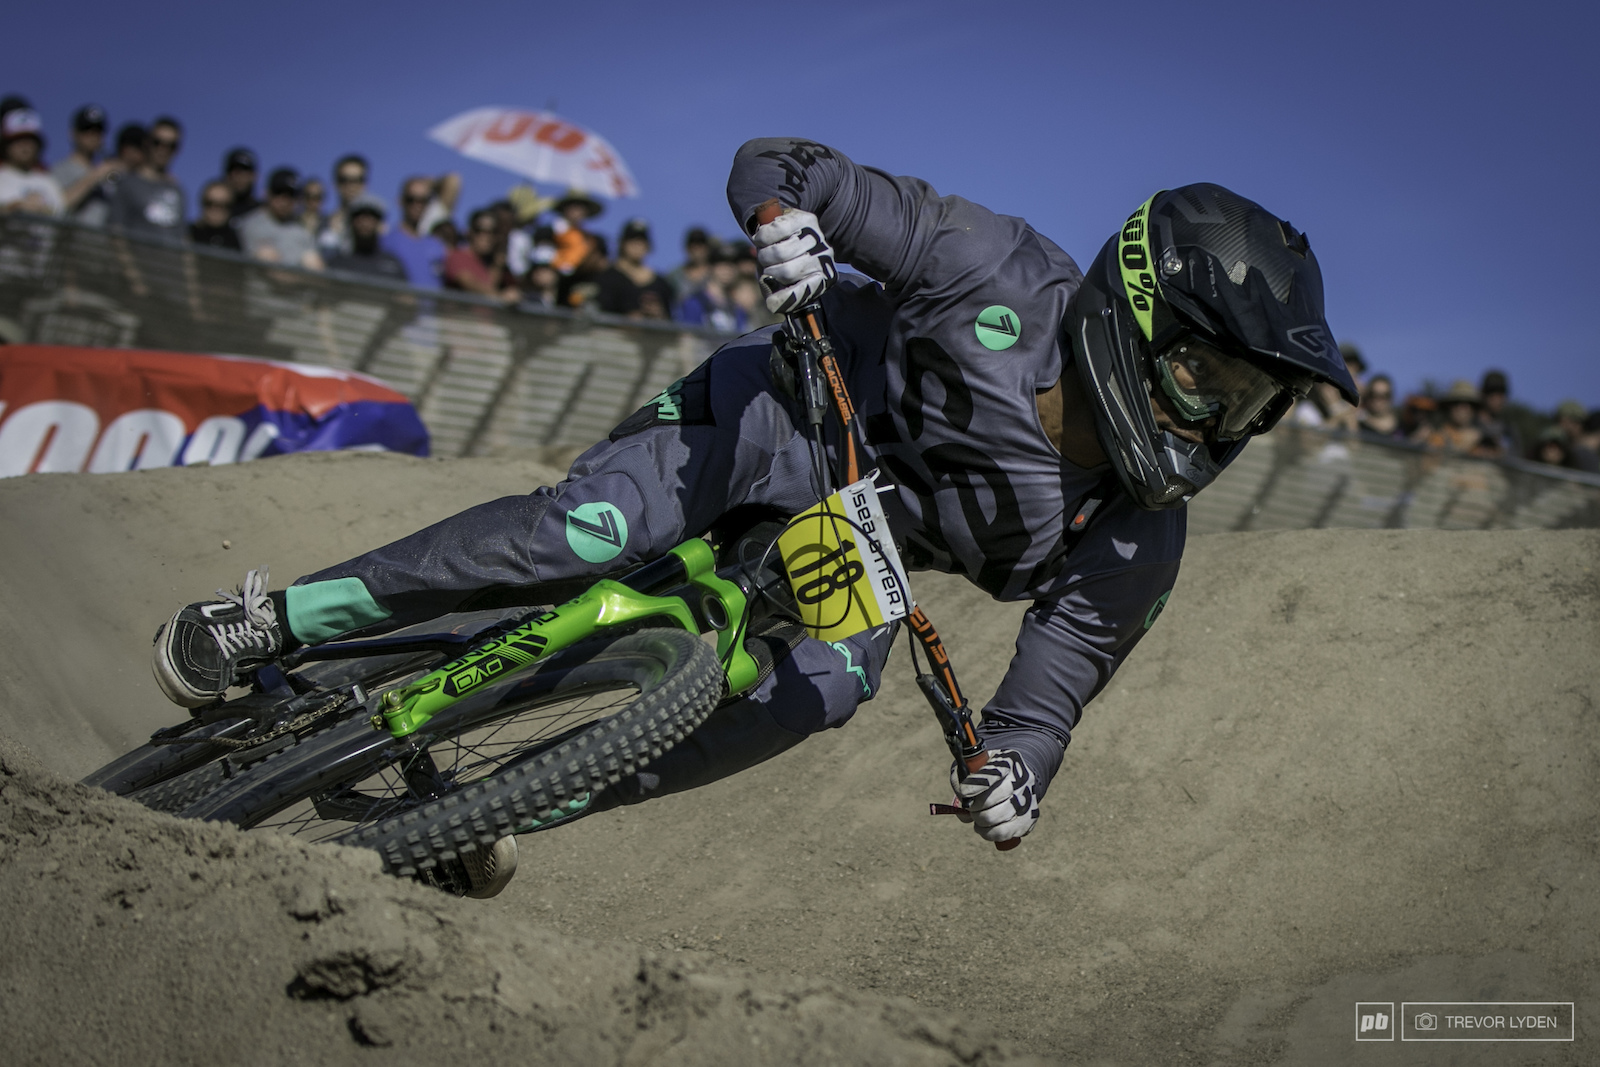 We were glad to see Jerome bounce back after his hard crash in the last round